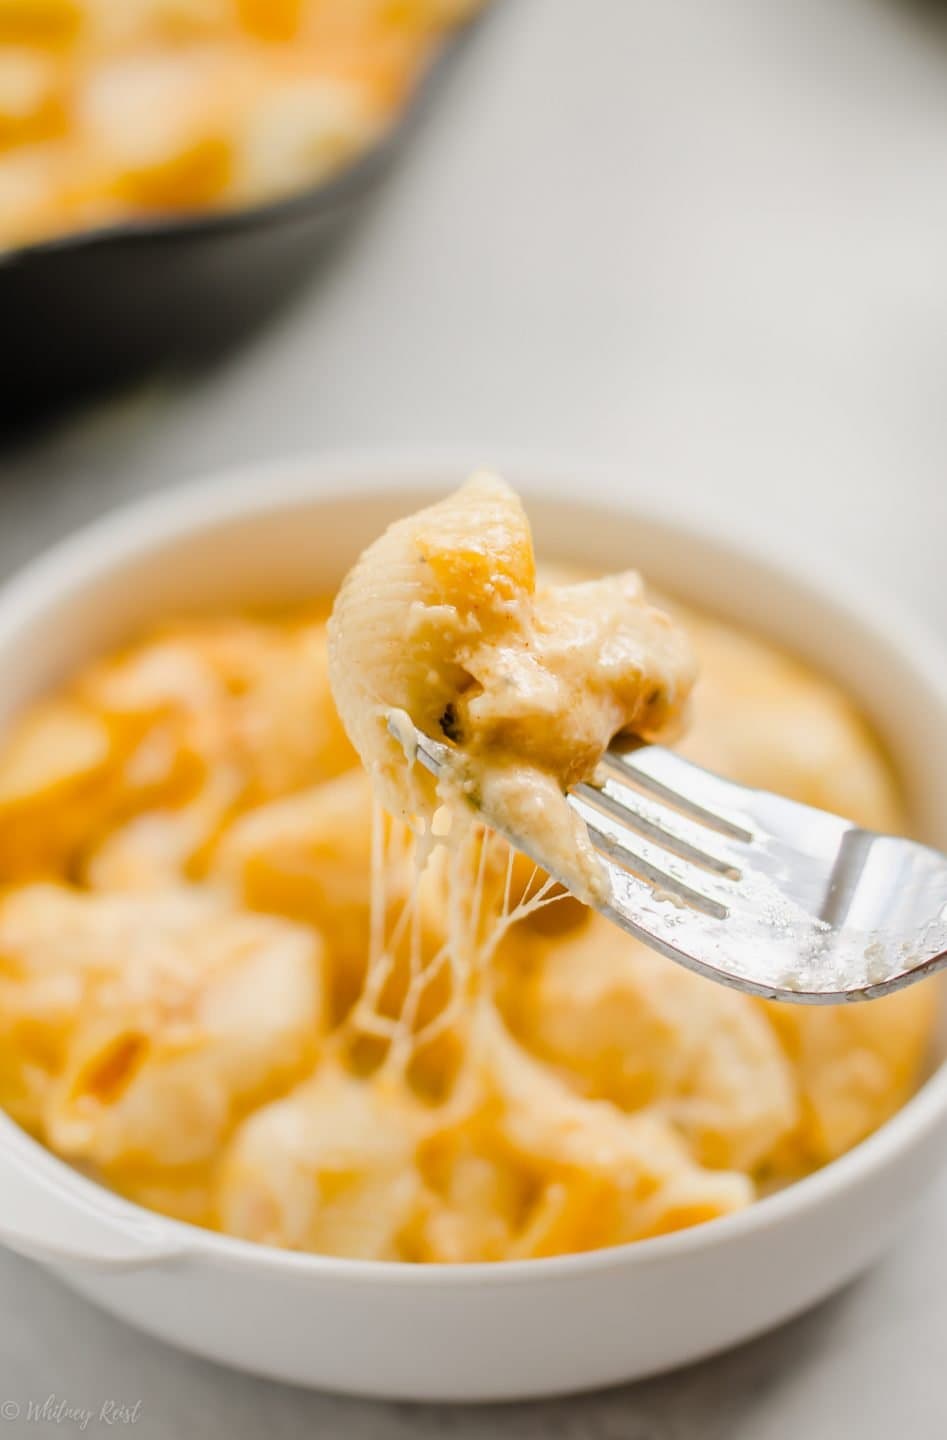 A close up shot of a fork with a bite of mac and cheese with strings of cheese coming from the dish below.